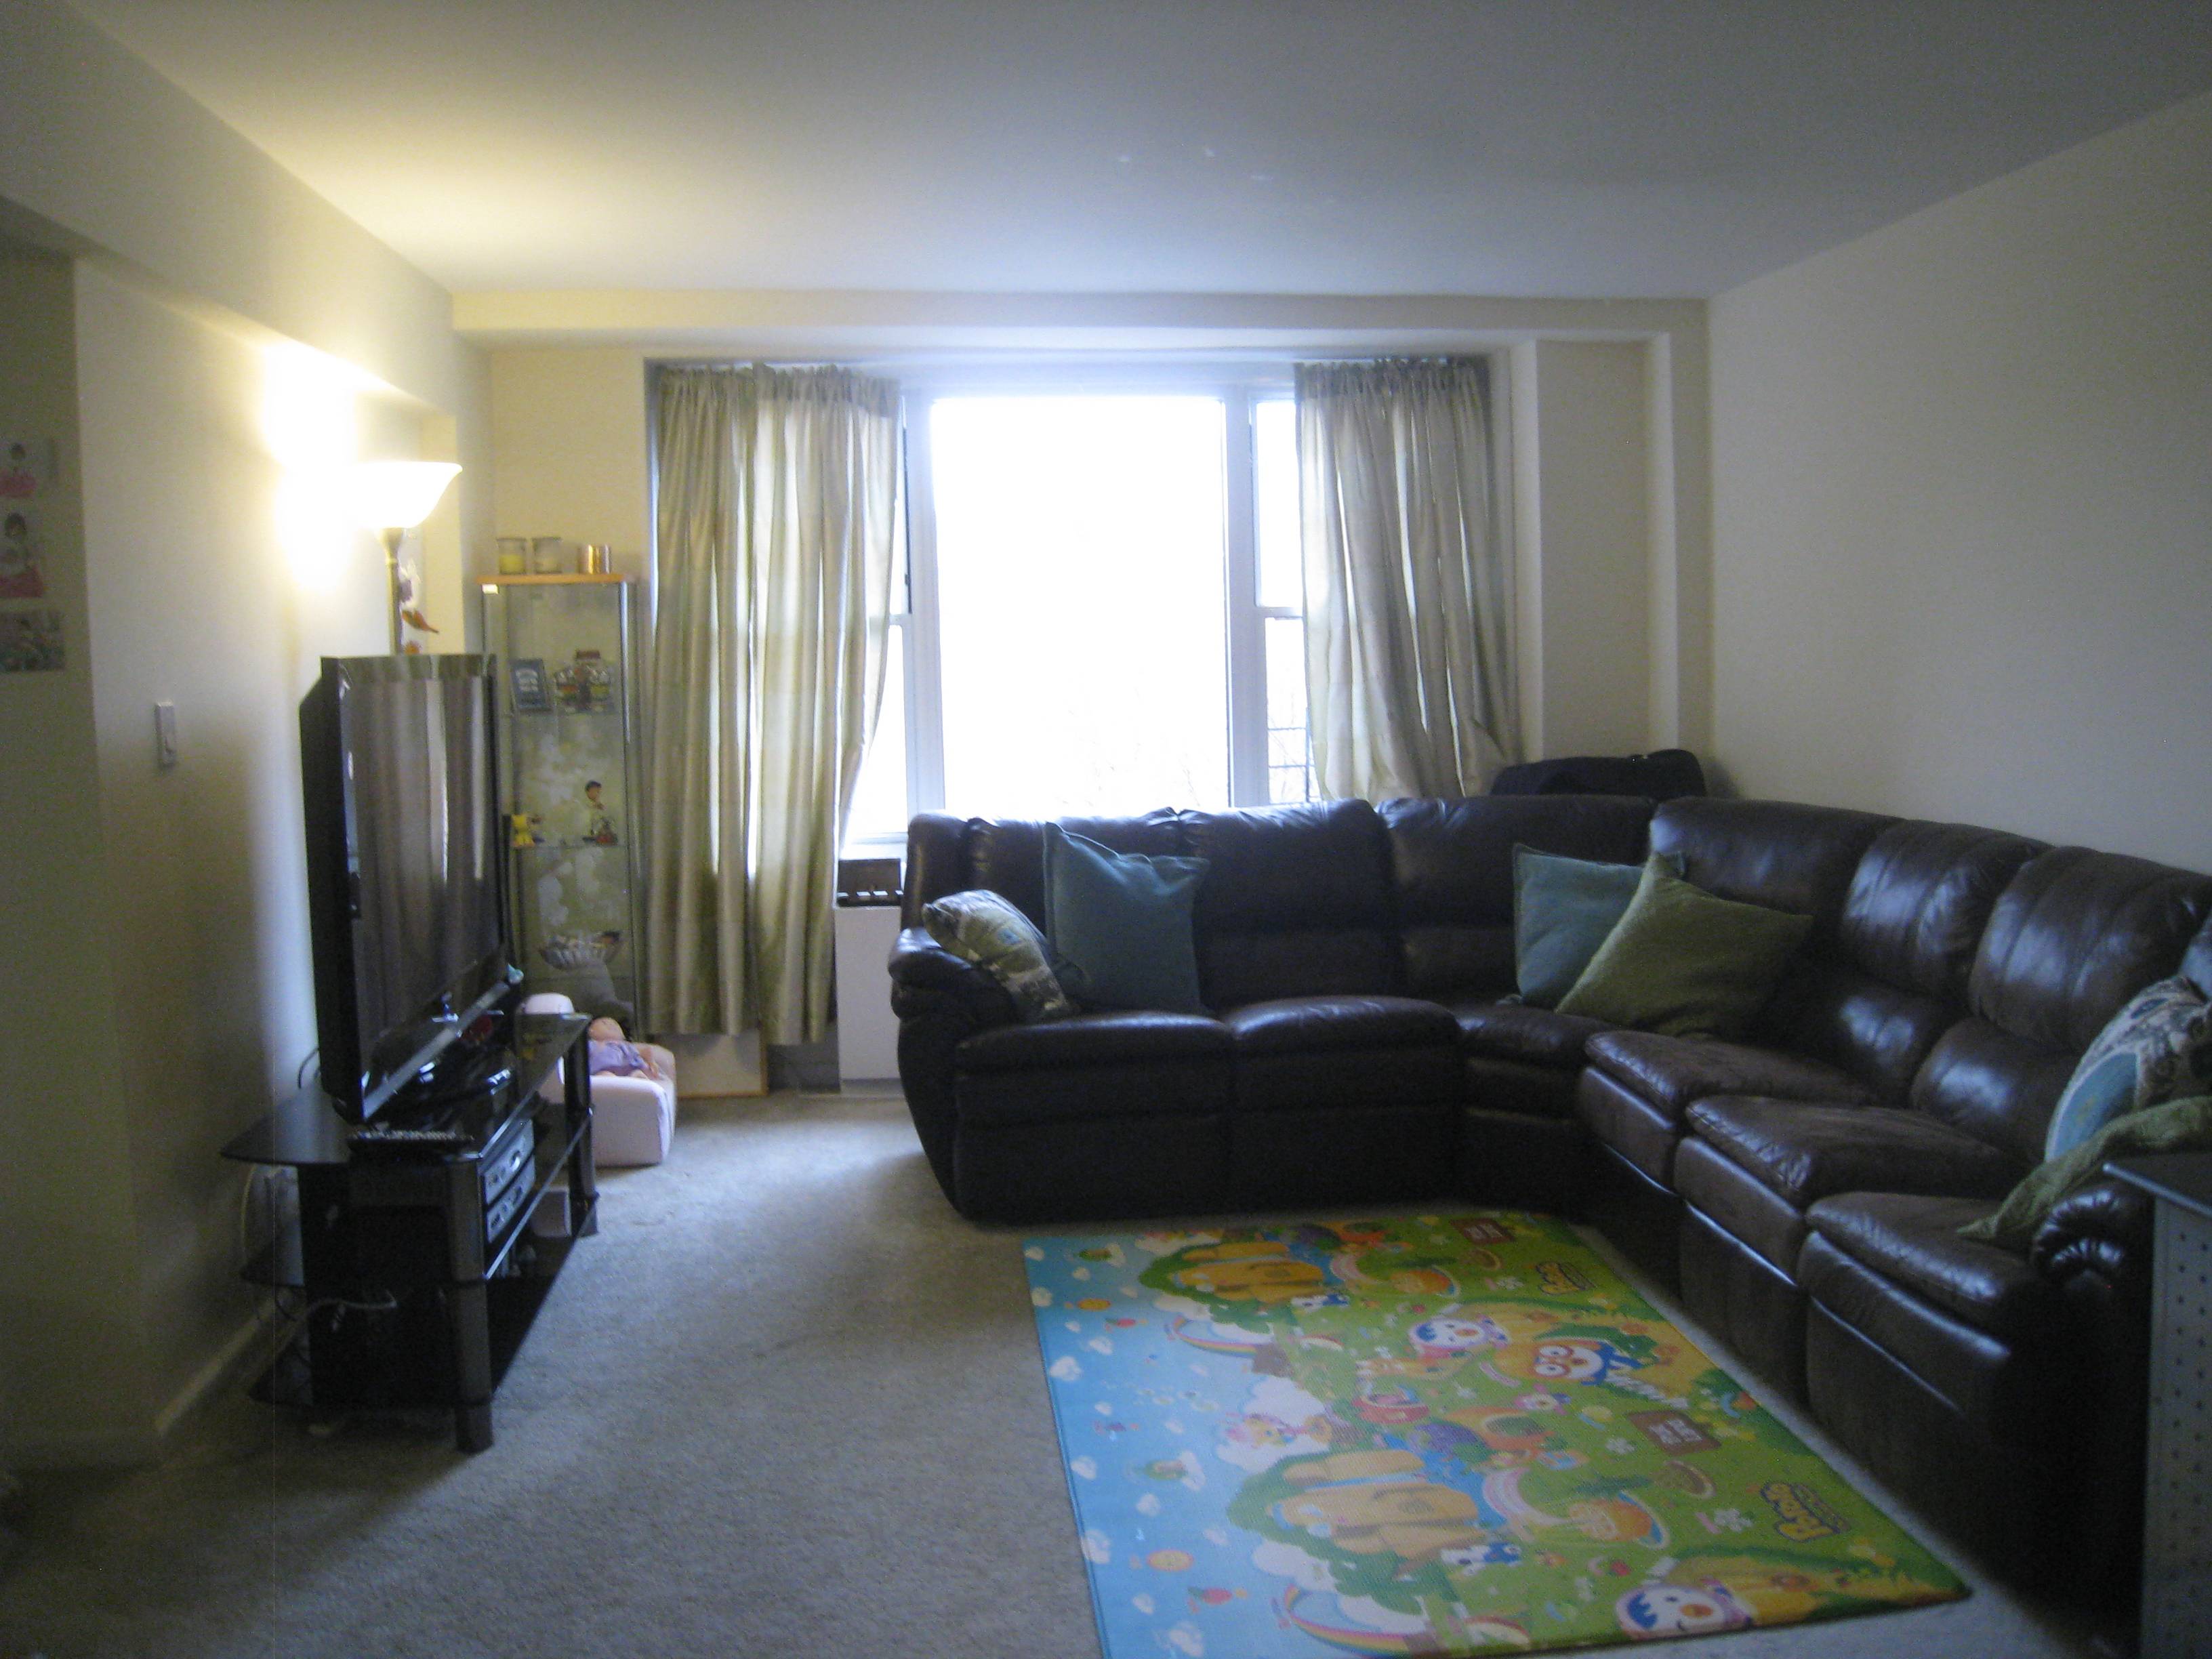 2BR Co-op, Bay Terrace in Bayside, NY for Sale